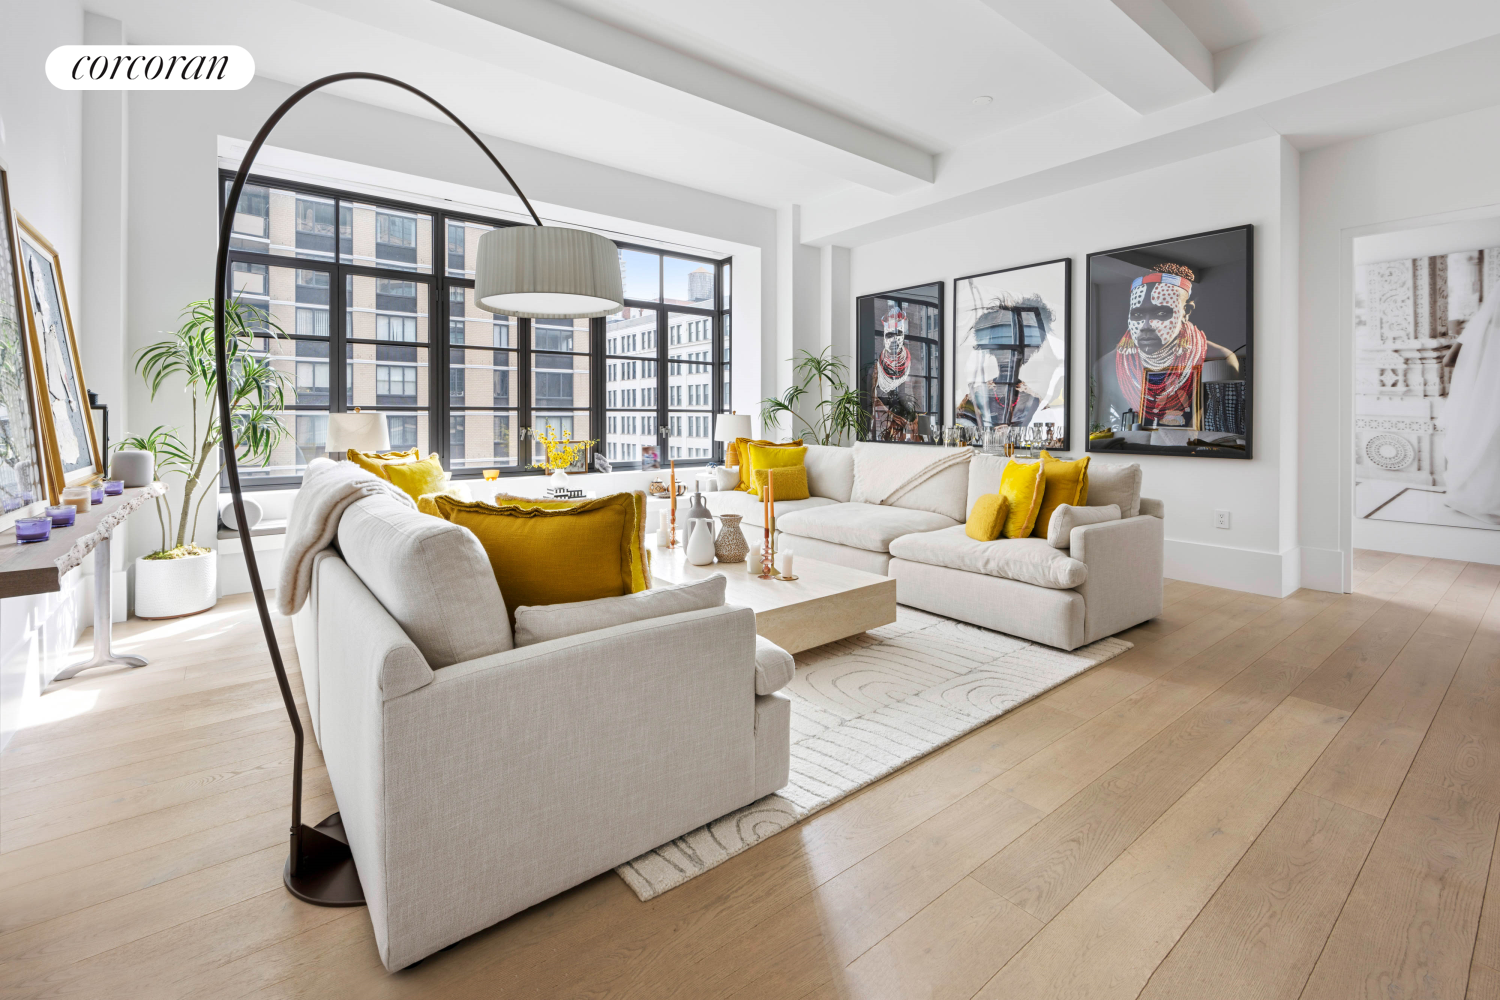 404 Park Avenue 9A, Nomad, Downtown, NYC - 2 Bedrooms  
2.5 Bathrooms  
4 Rooms - 